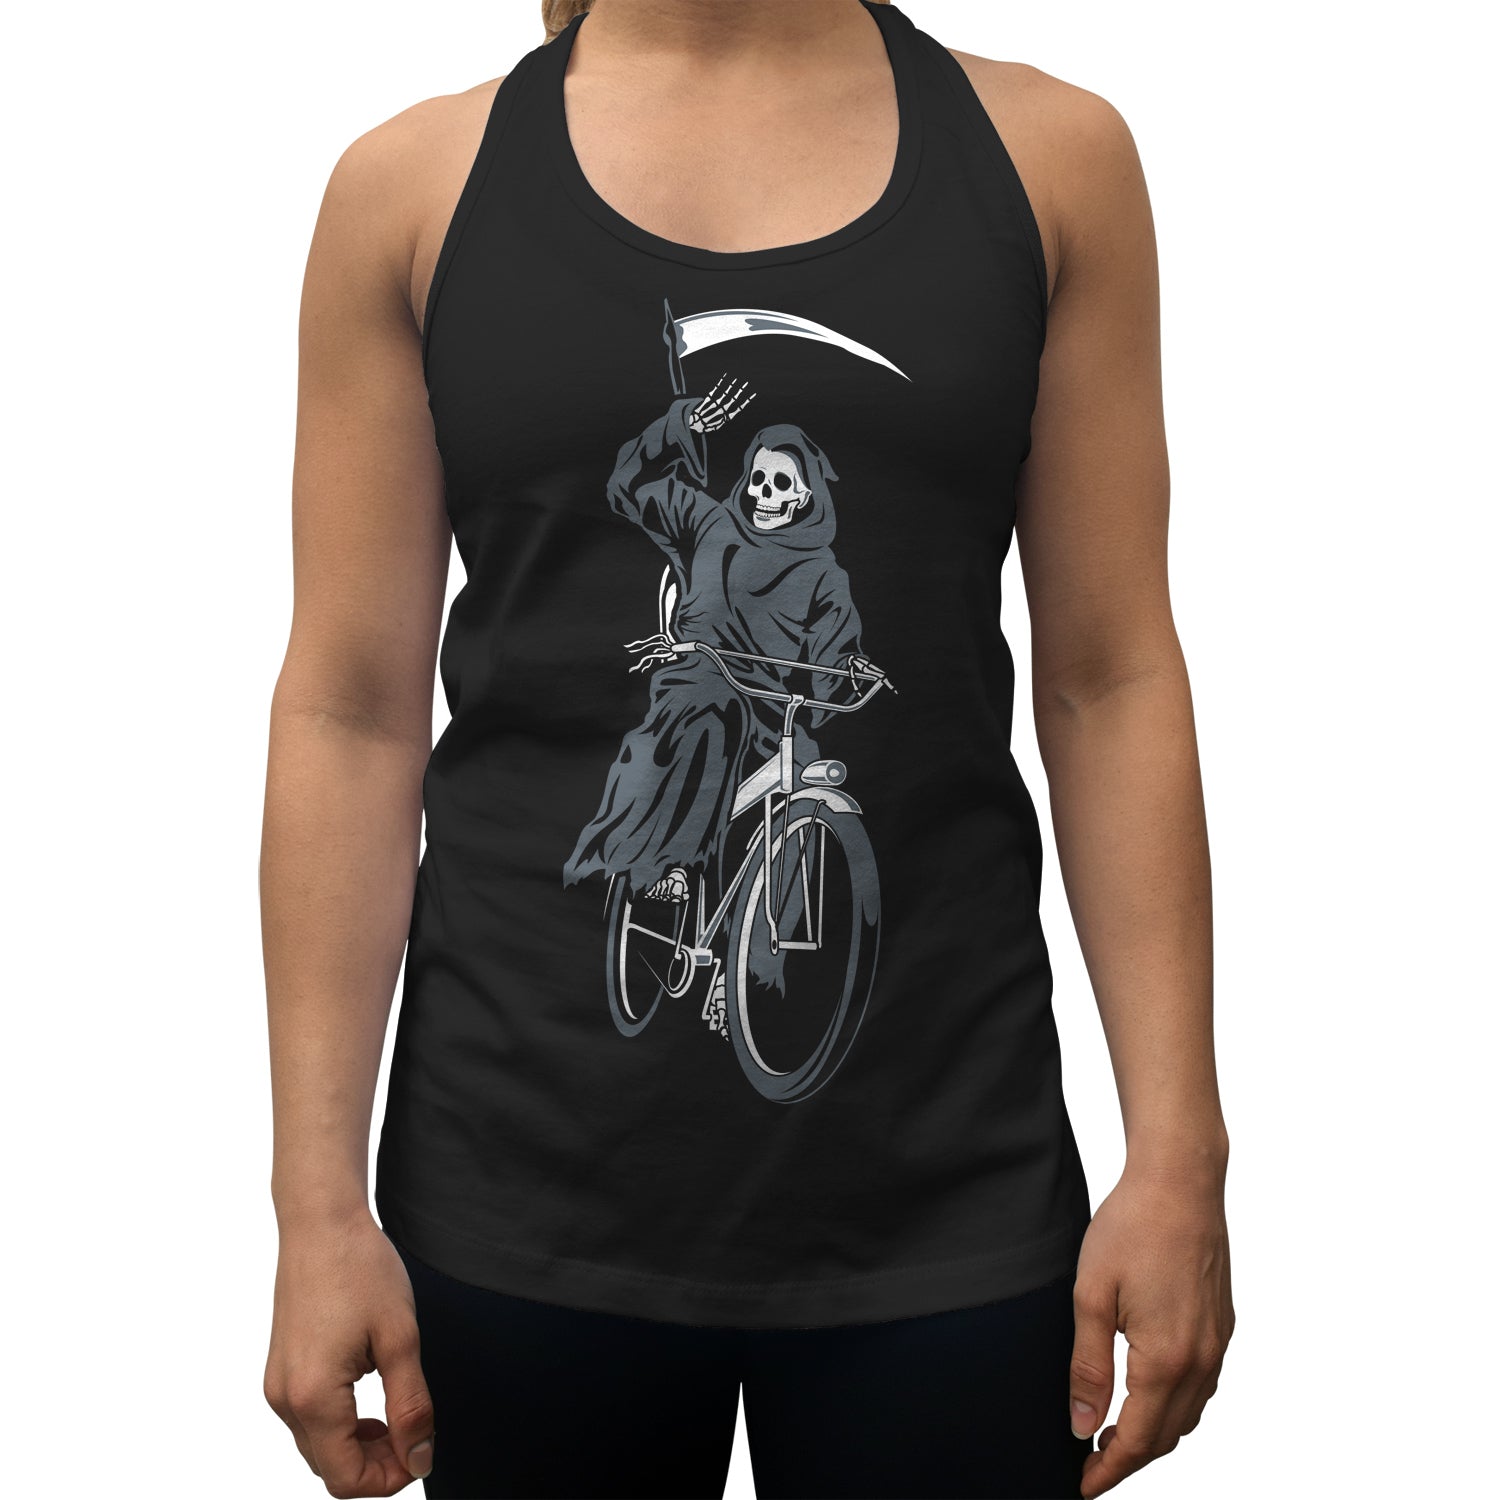 Women's Death Takes a Holiday Racerback Tank Top